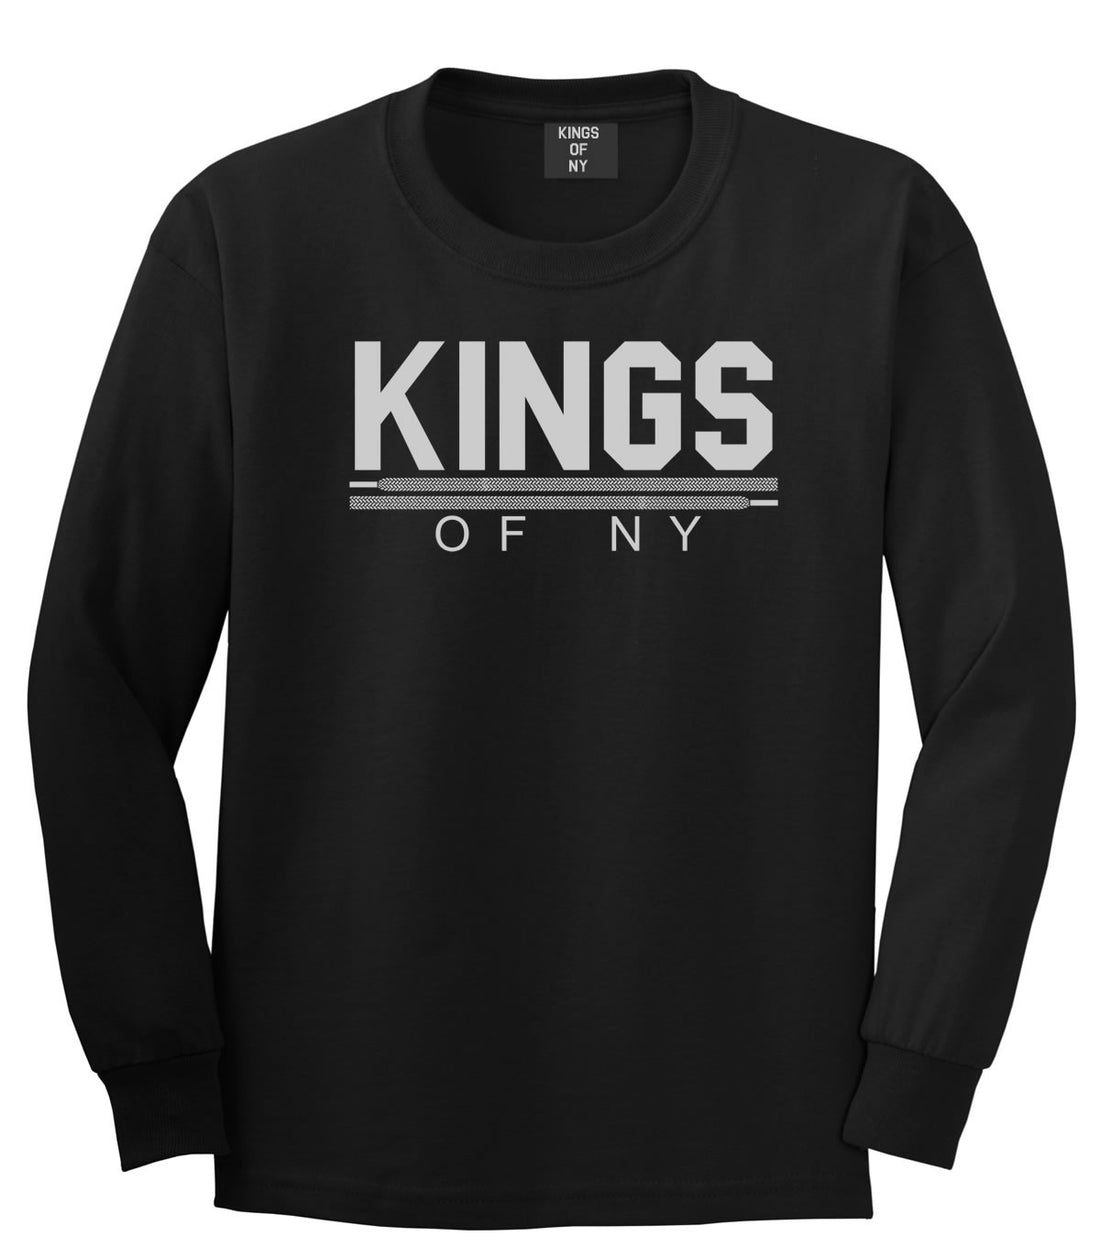 Kings Of NY Laces Long Sleeve T-Shirt in Black By Kings Of NY